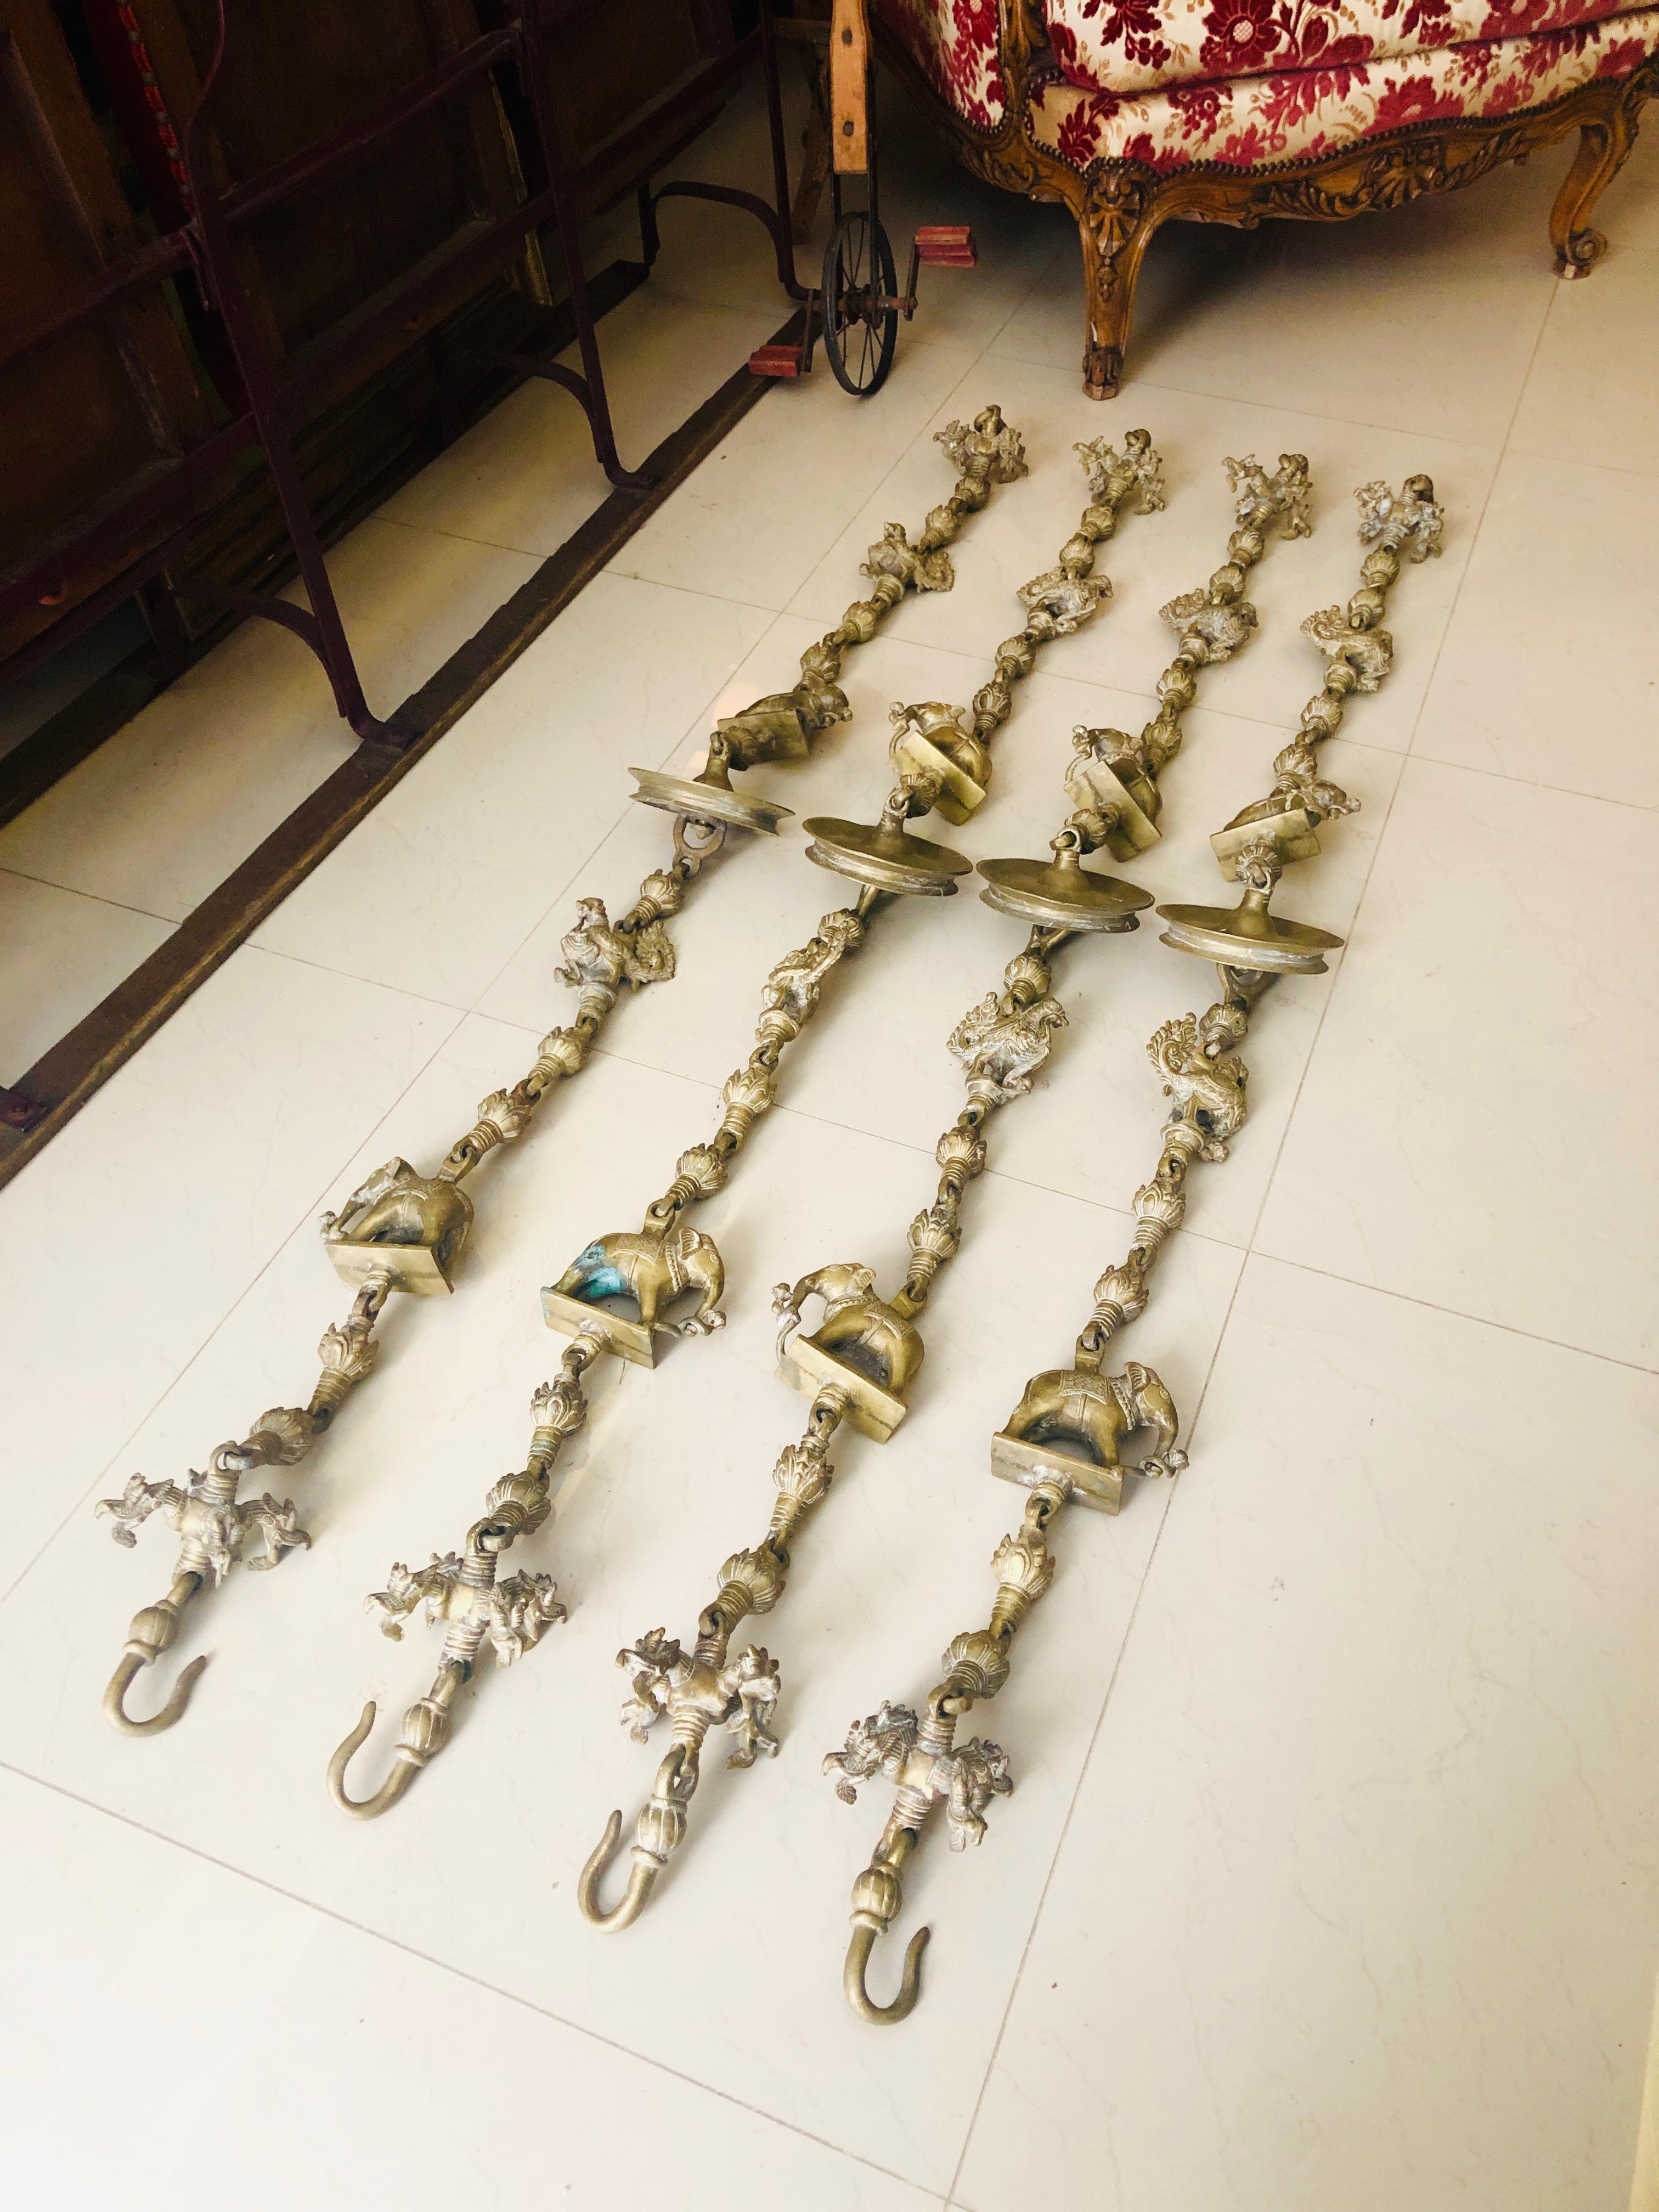 Indian swing set consisting of four handmade bronze chains decorated with elephants and birds, exotic wooden platform.
Very good condition.
India.